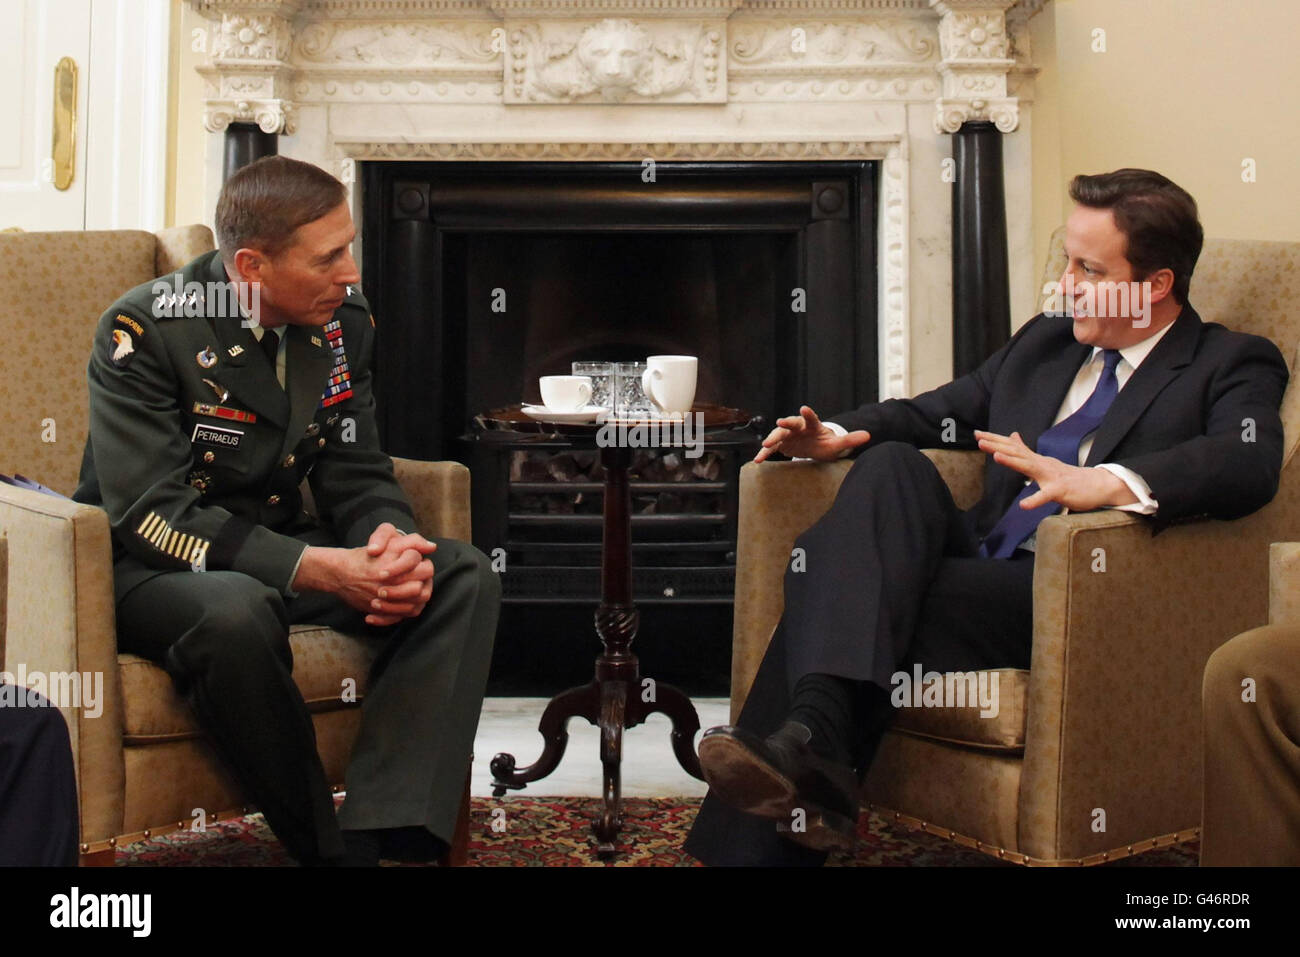 Commander of the NATO International Security Assistance Force (ISAF), and US Forces in Afghanistan, General David Petraeus (left) has a meeting with Prime Minister David Cameron (right) at 10 Downing Street in London. Stock Photo